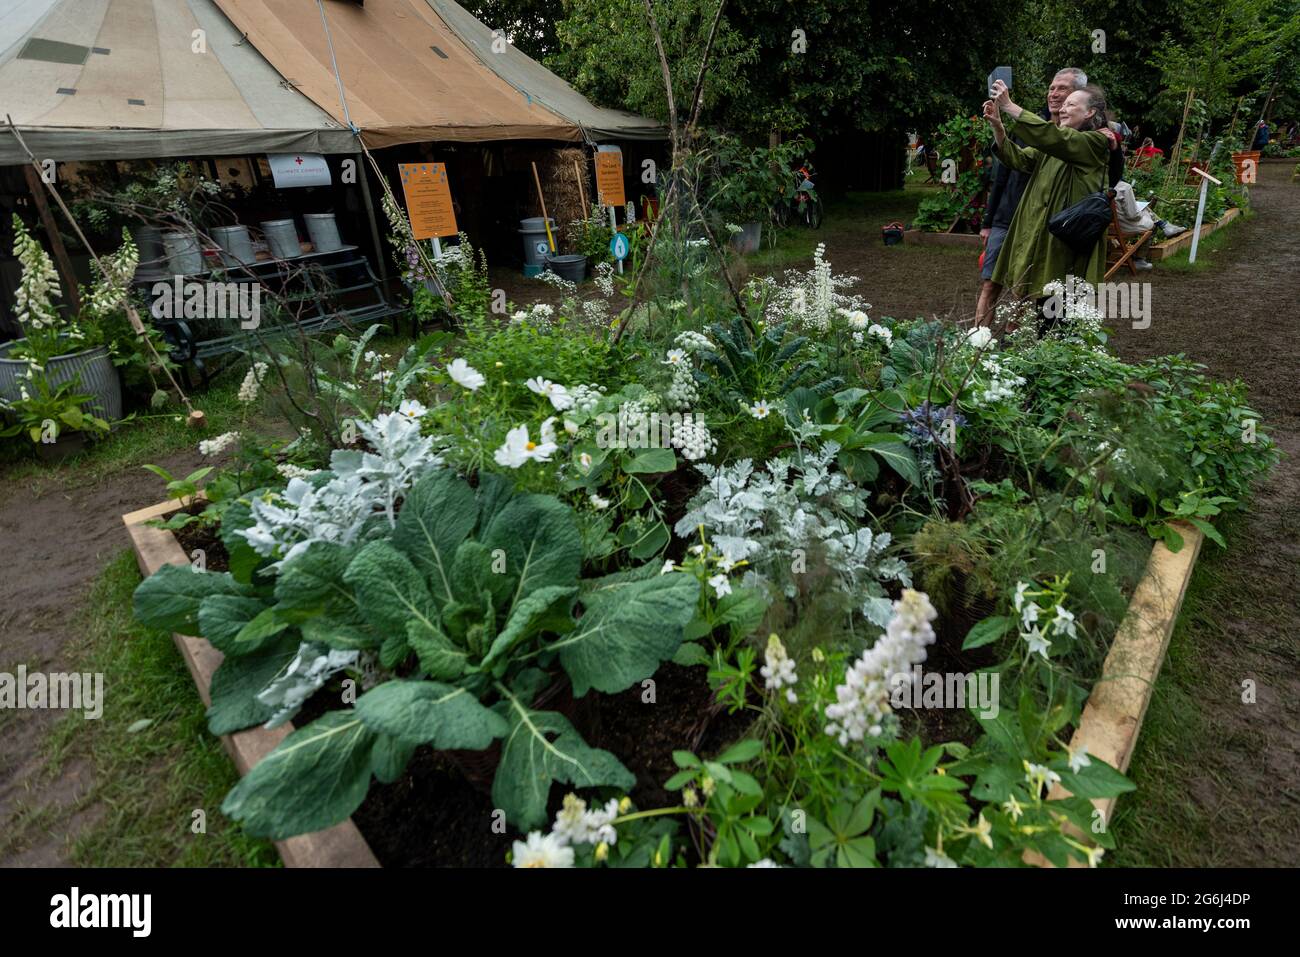 London, UK.  6 July 2021. One of the RHS allotment displays as the rescheduled RHS Hampton Court Palace Garden Festival opens to the public. No dig is a form of cultivation advocated by gardener Charles Dowding. Cancelled in 2020 due to the ongoing coronavirus pandemic, the world’s largest flower show includes gardens from inspiring designers, celebrity talks, demonstrations and workshops.  Visitors to the show are required to observe Covid-19 protocols.  Credit: Stephen Chung / Alamy Live News Stock Photo